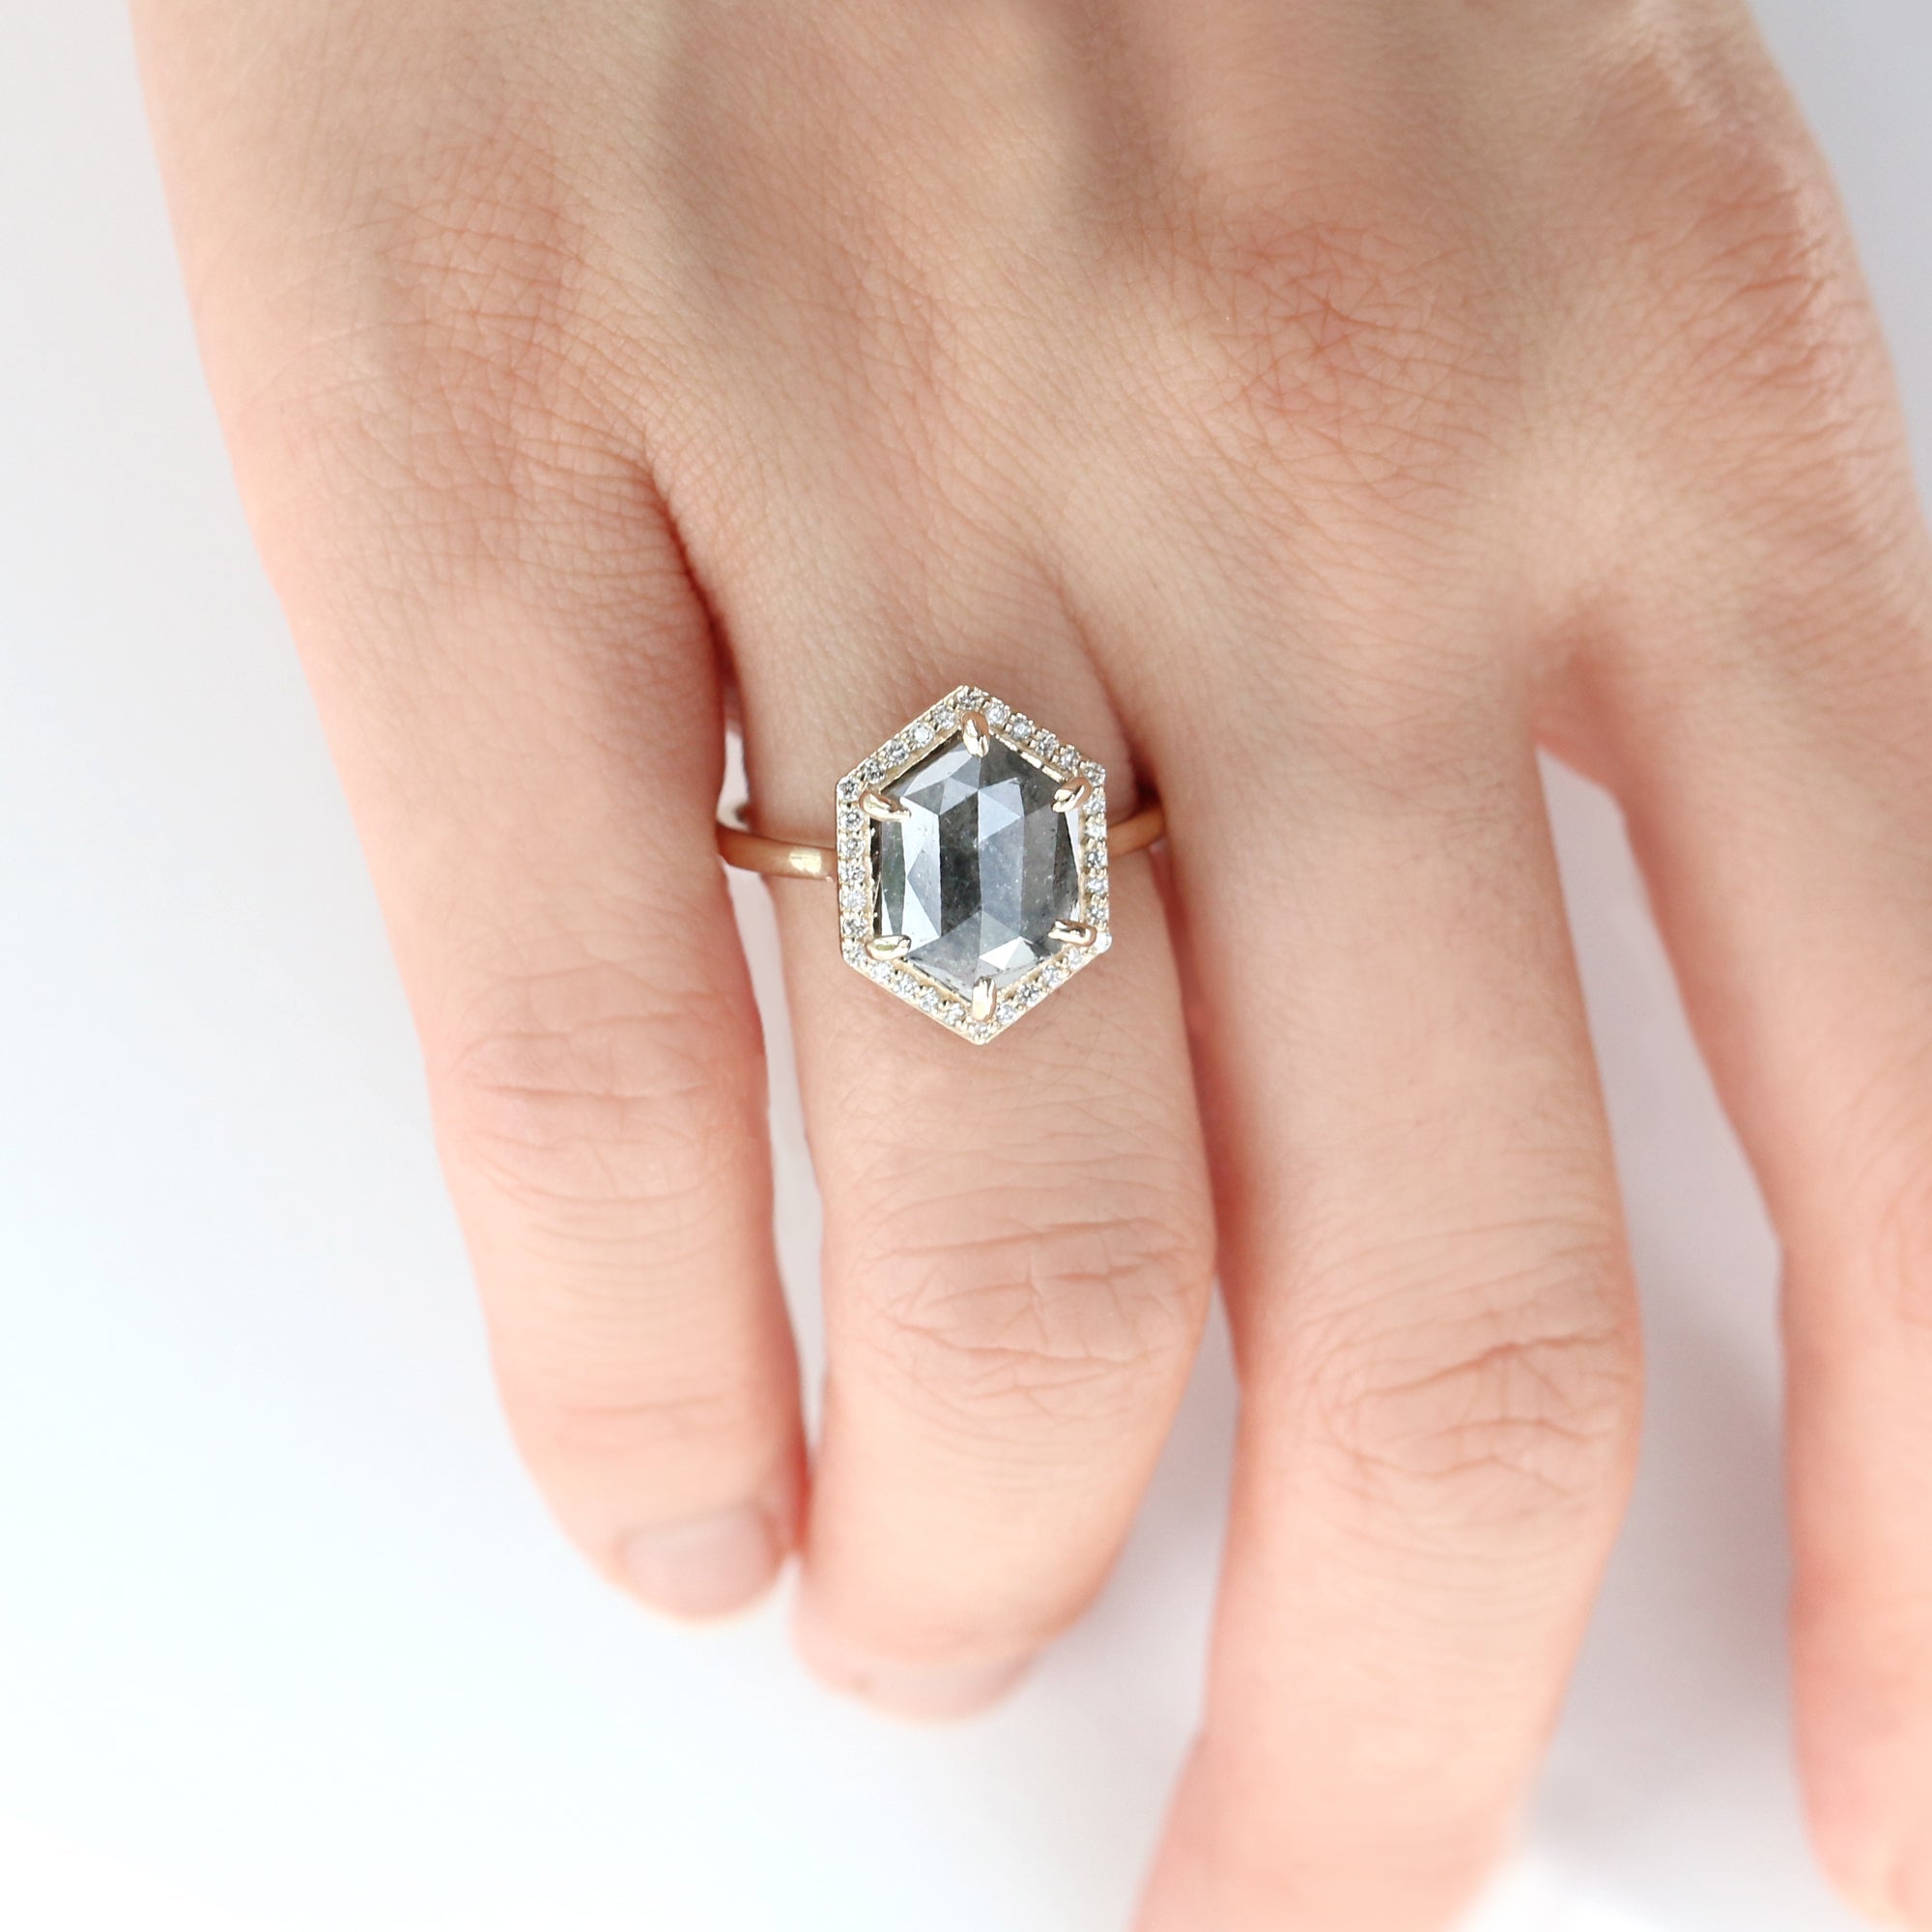 Jamie Park Jewelry - 2.8ct. Hexagon Salt and Pepper Diamond Ring https://jamieparkjewelry.com/products/3ct-hexagon-diamond-ring Experience luxury with our newly restocked Hexagon Halo Diamond Ring. Embellished with a striking 2.8 ct salt and pepper diamond in a unique hexagon cut, this ring is made to catch the spotlight. The bold center gemstone framed by the radiant white diamond halo, sparkles with every movement you make. The perfect choice…